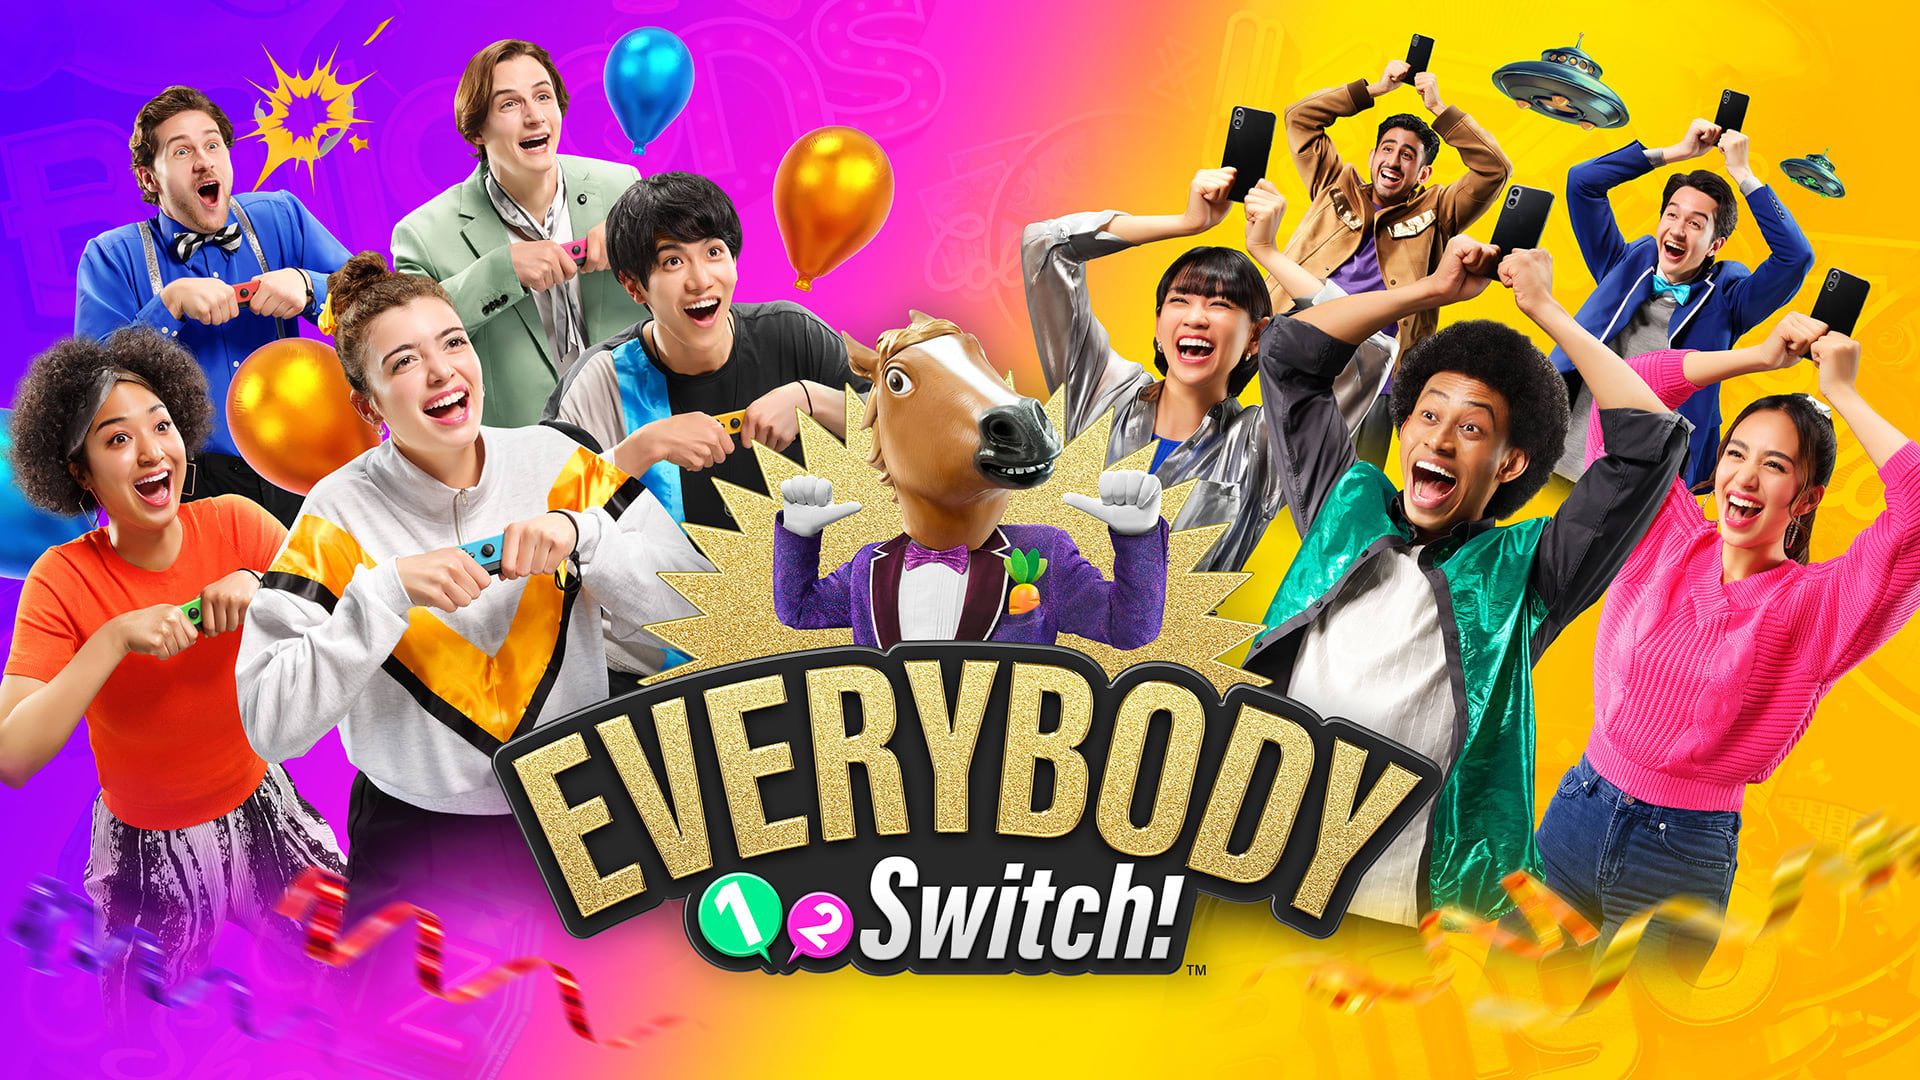 Why the Everybody 1-2-Switch! is the perfect family party game